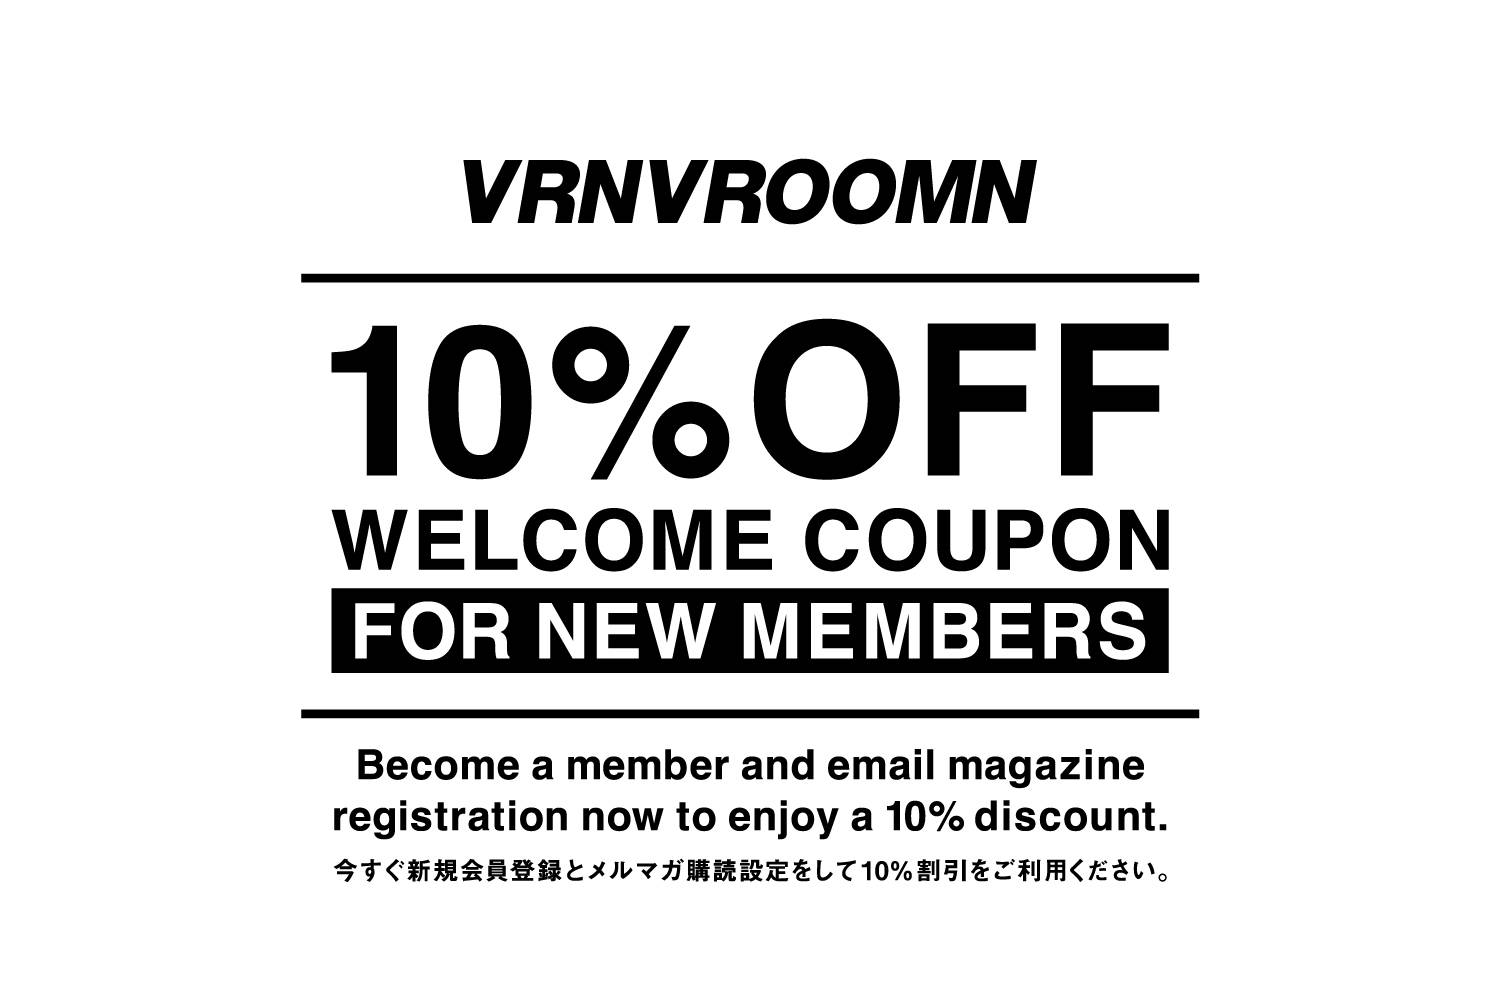 10%OFF WELCOME COUPON FOR NEW MEMBERS.